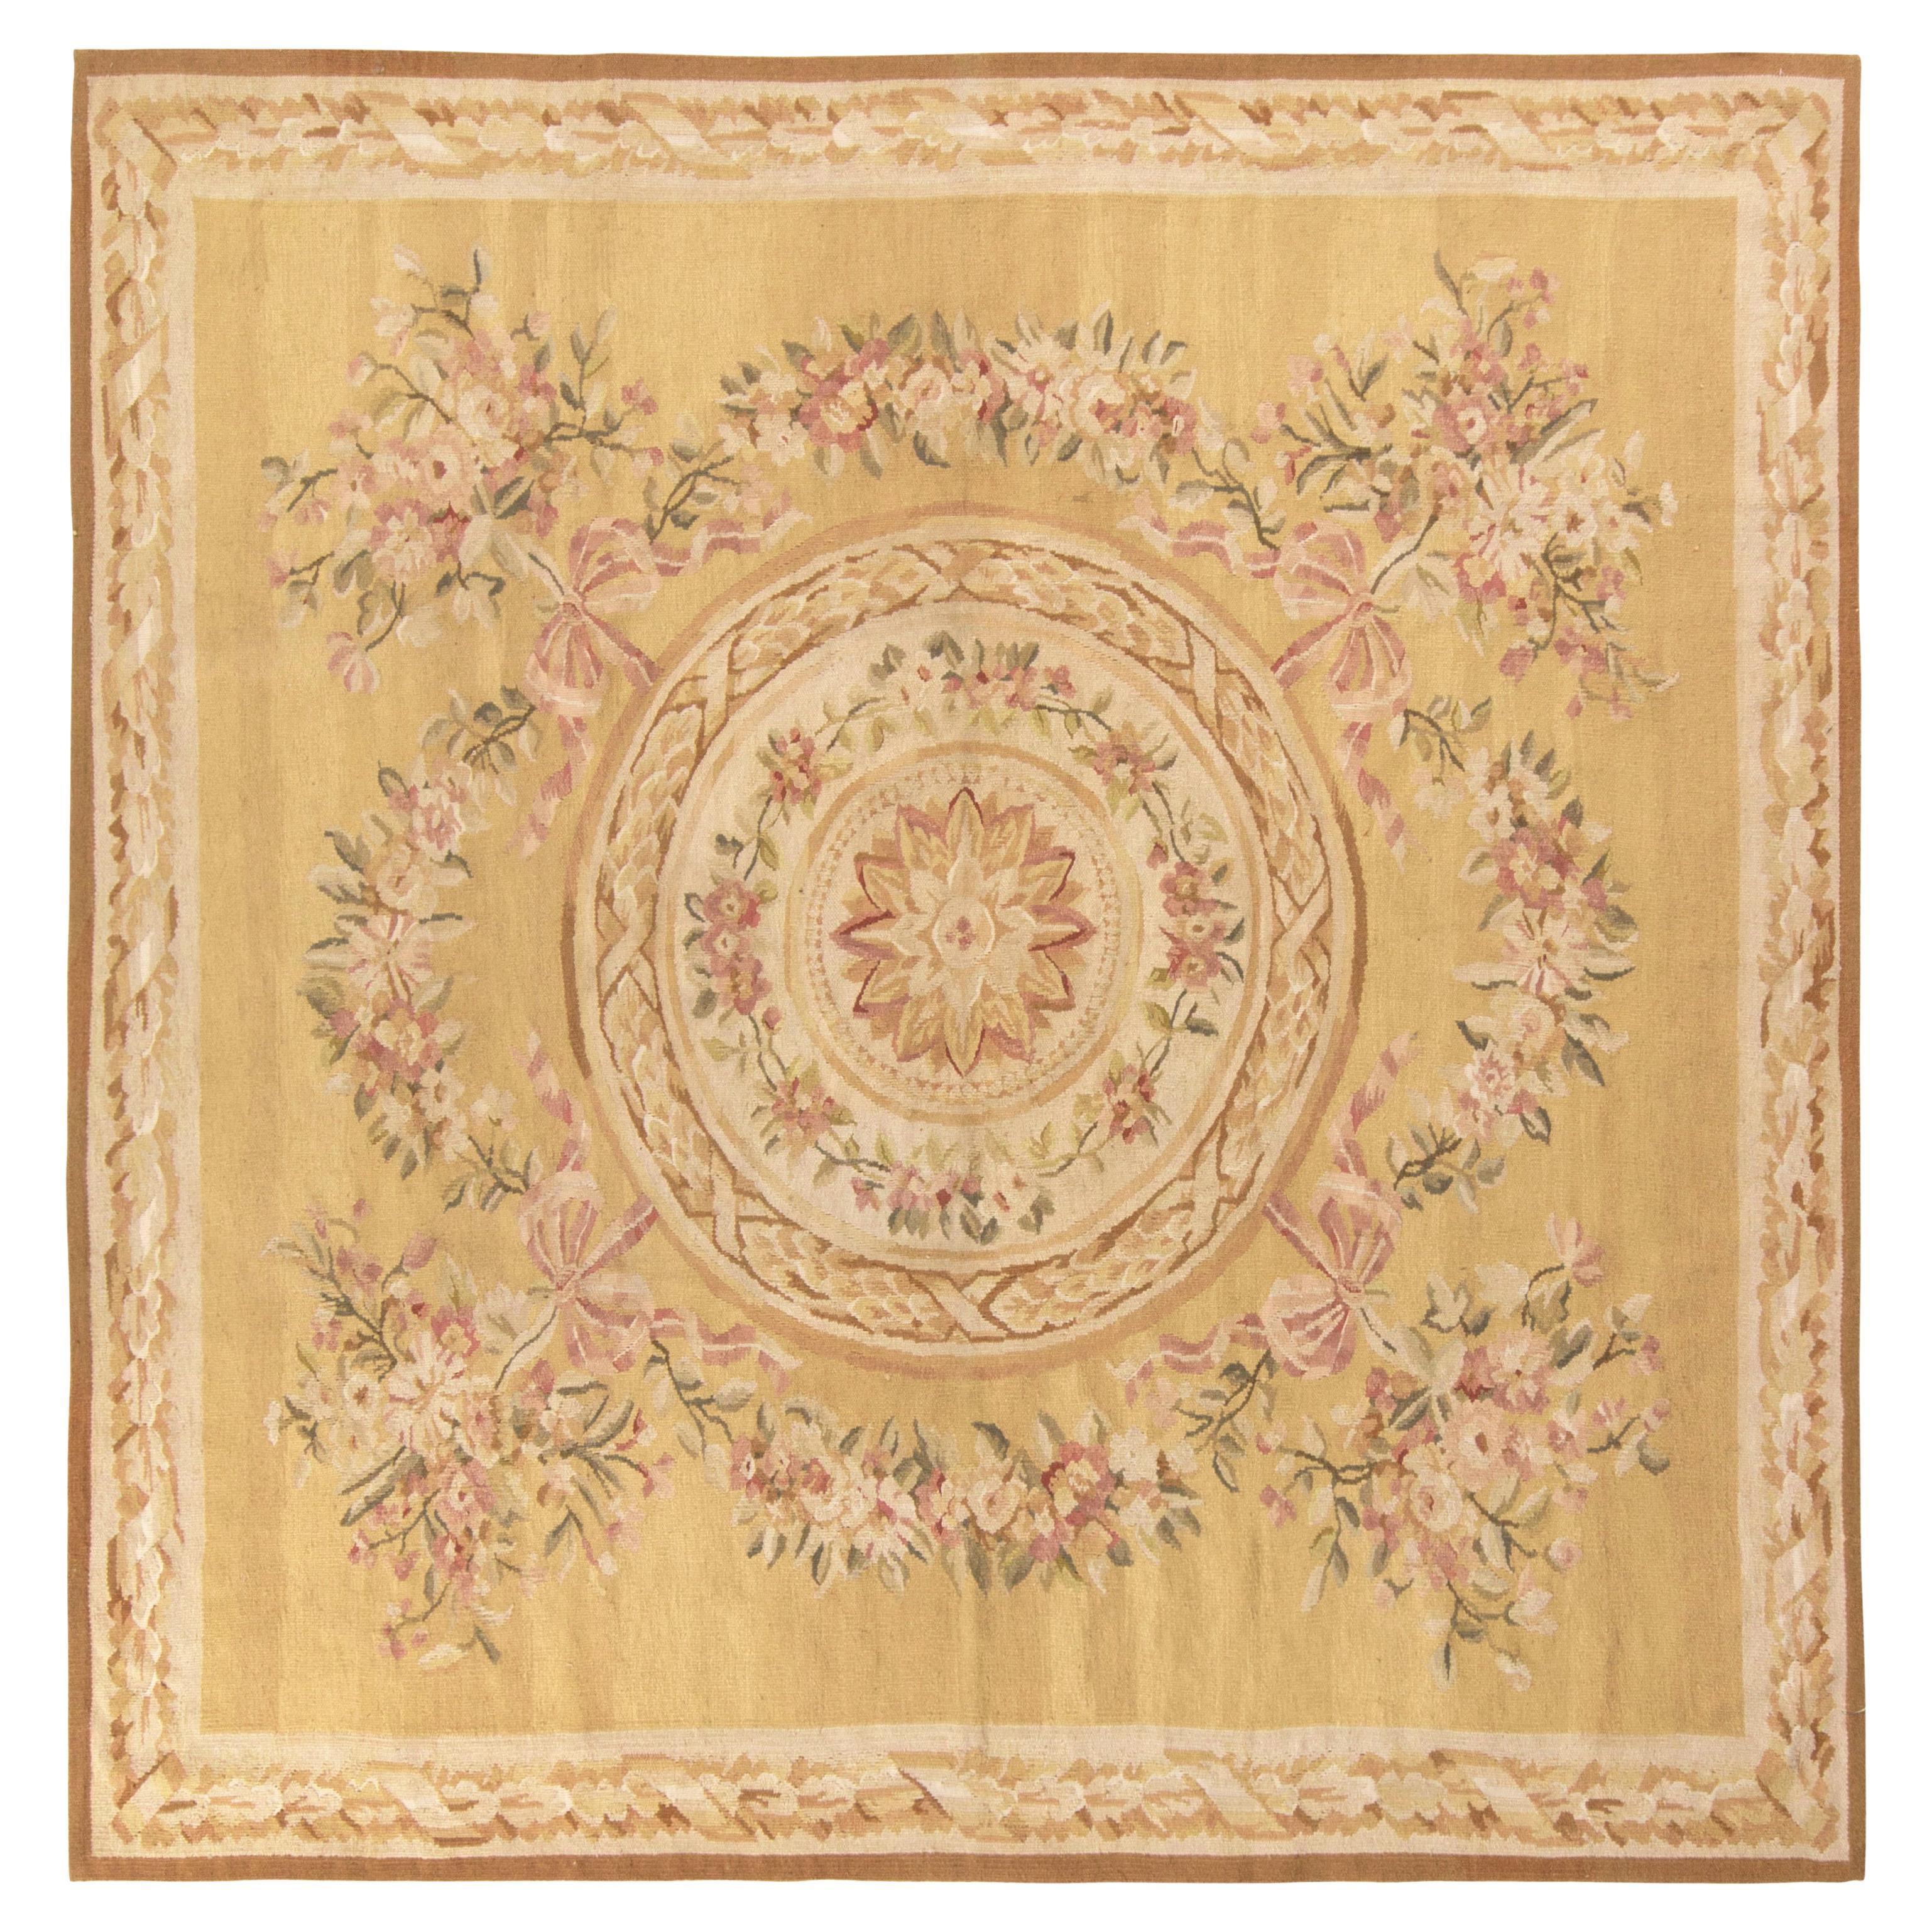 Rug & Kilim’s Aubusson Style Flat Weave in Beige, Cream Medallion Floral Pattern